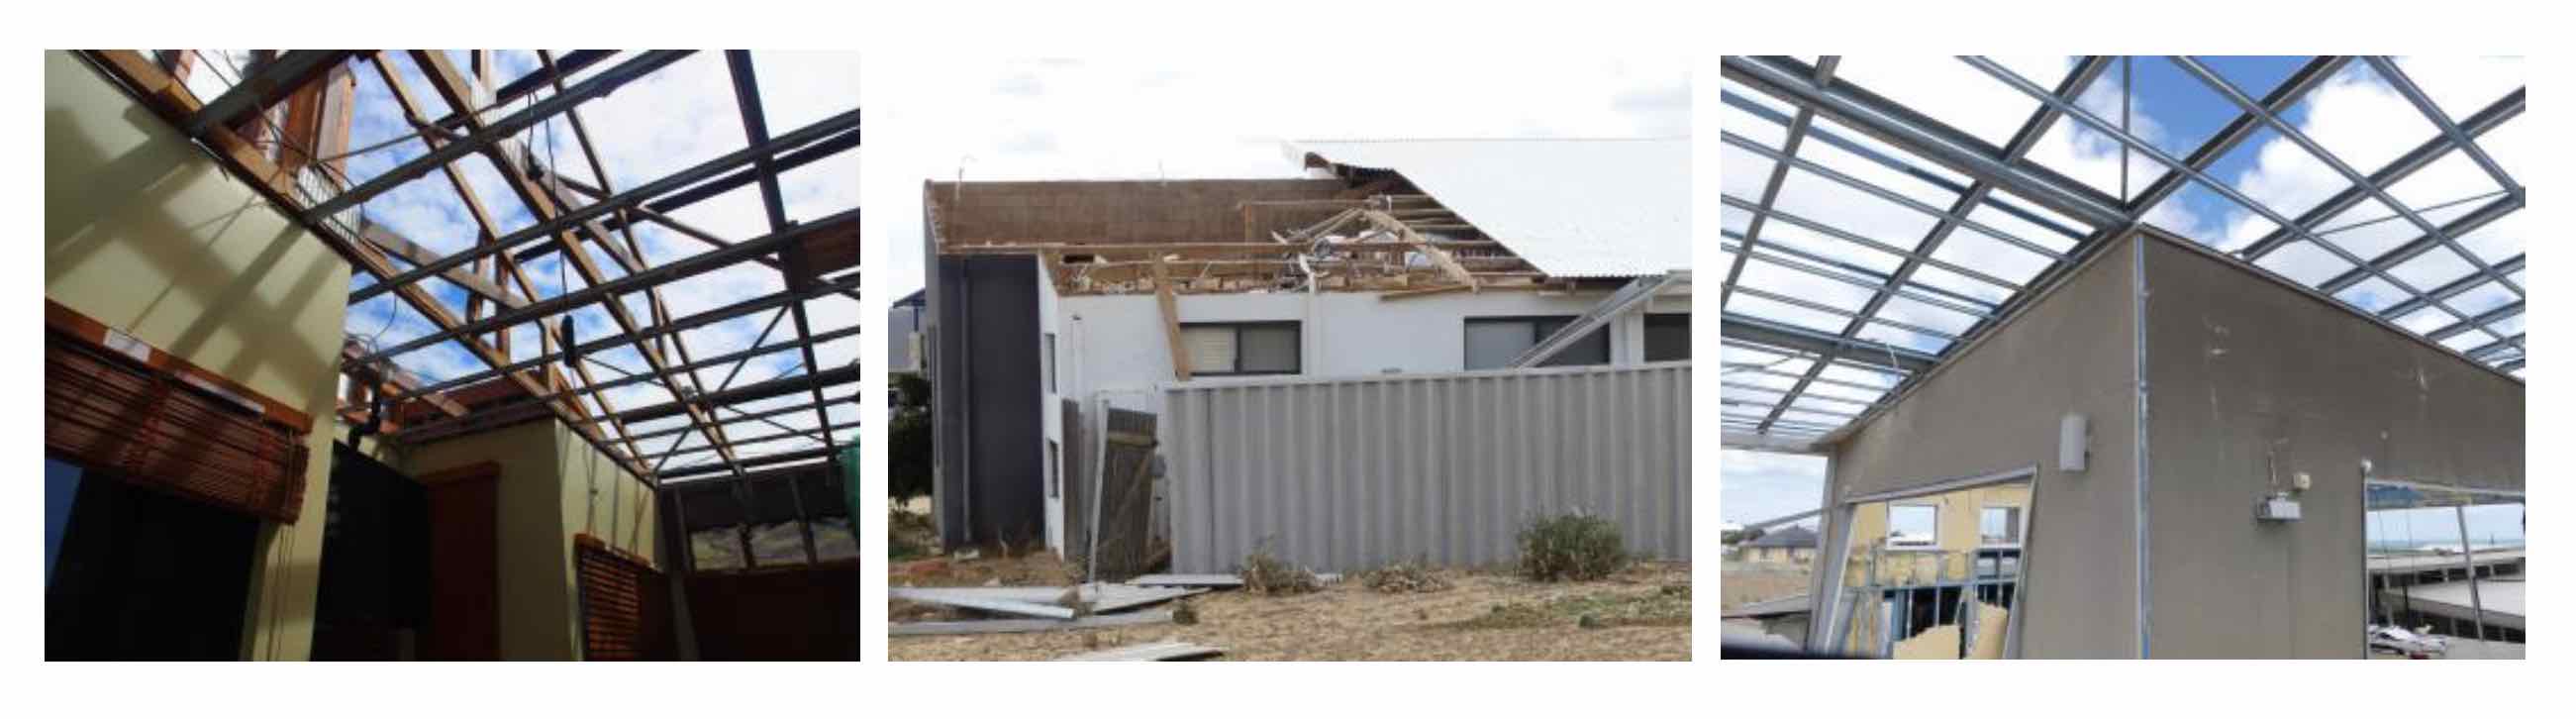 Significant damage to houses in previous tropical cyclones